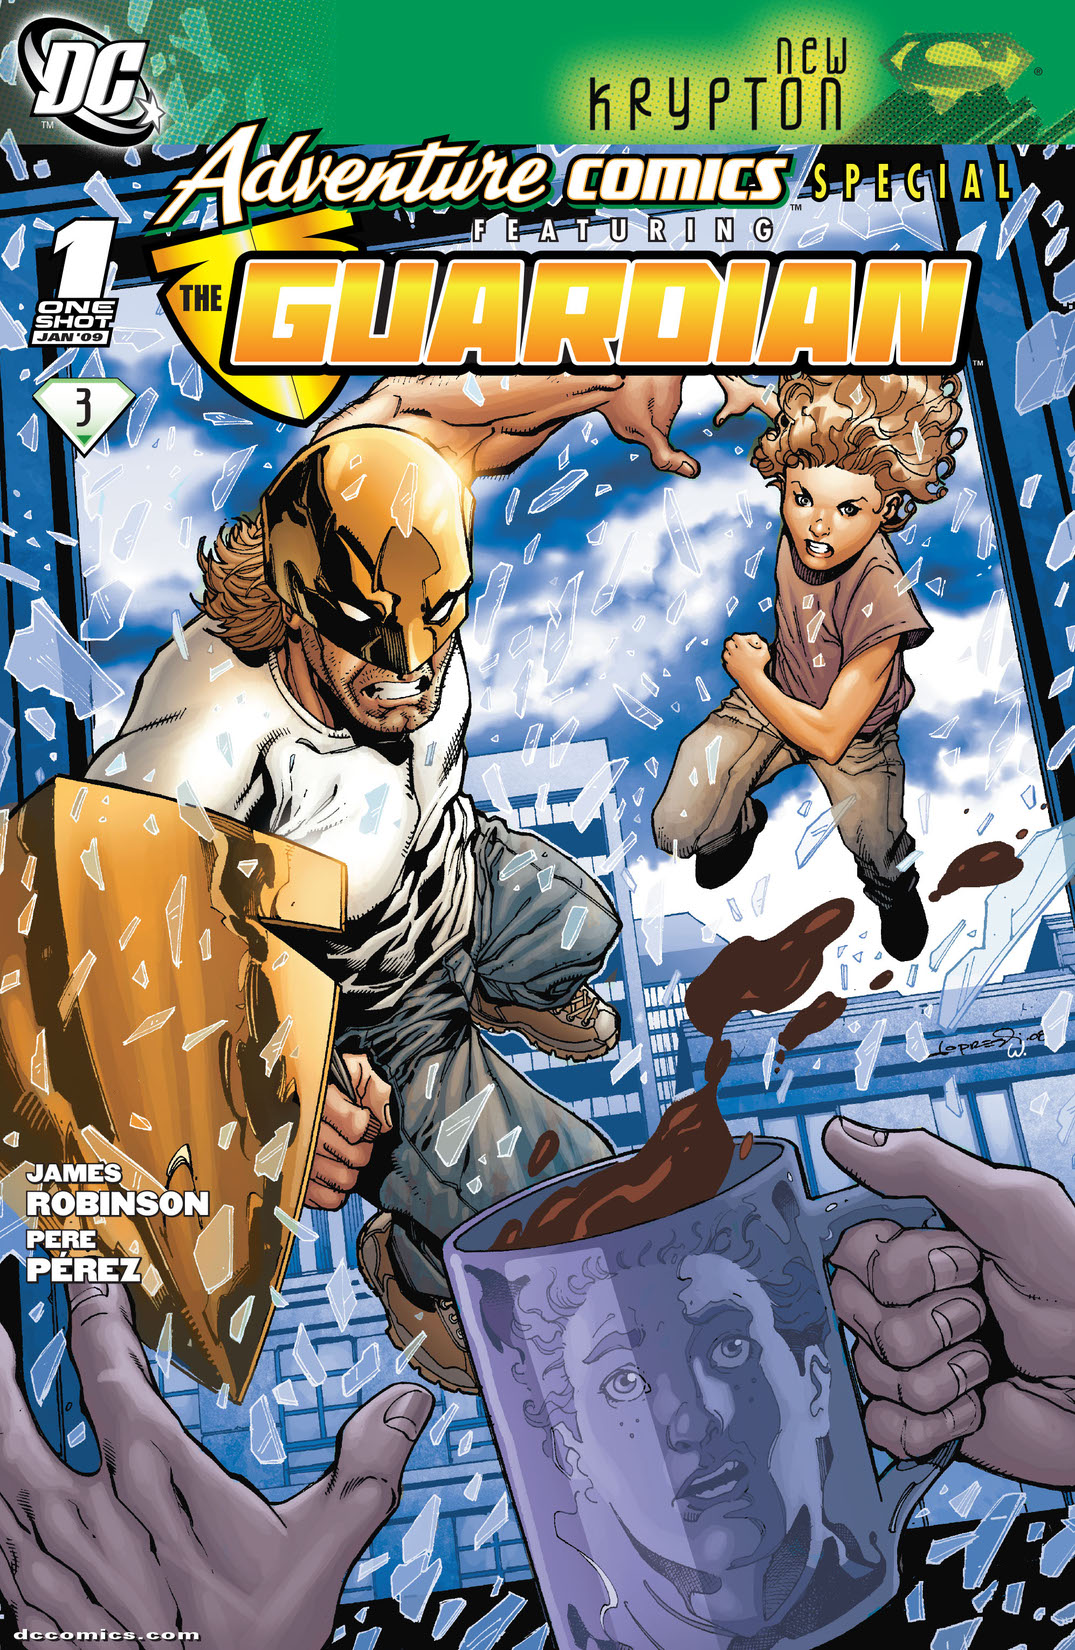 Adventure Comics Special featuring the Guardian (2008-) #1 preview images